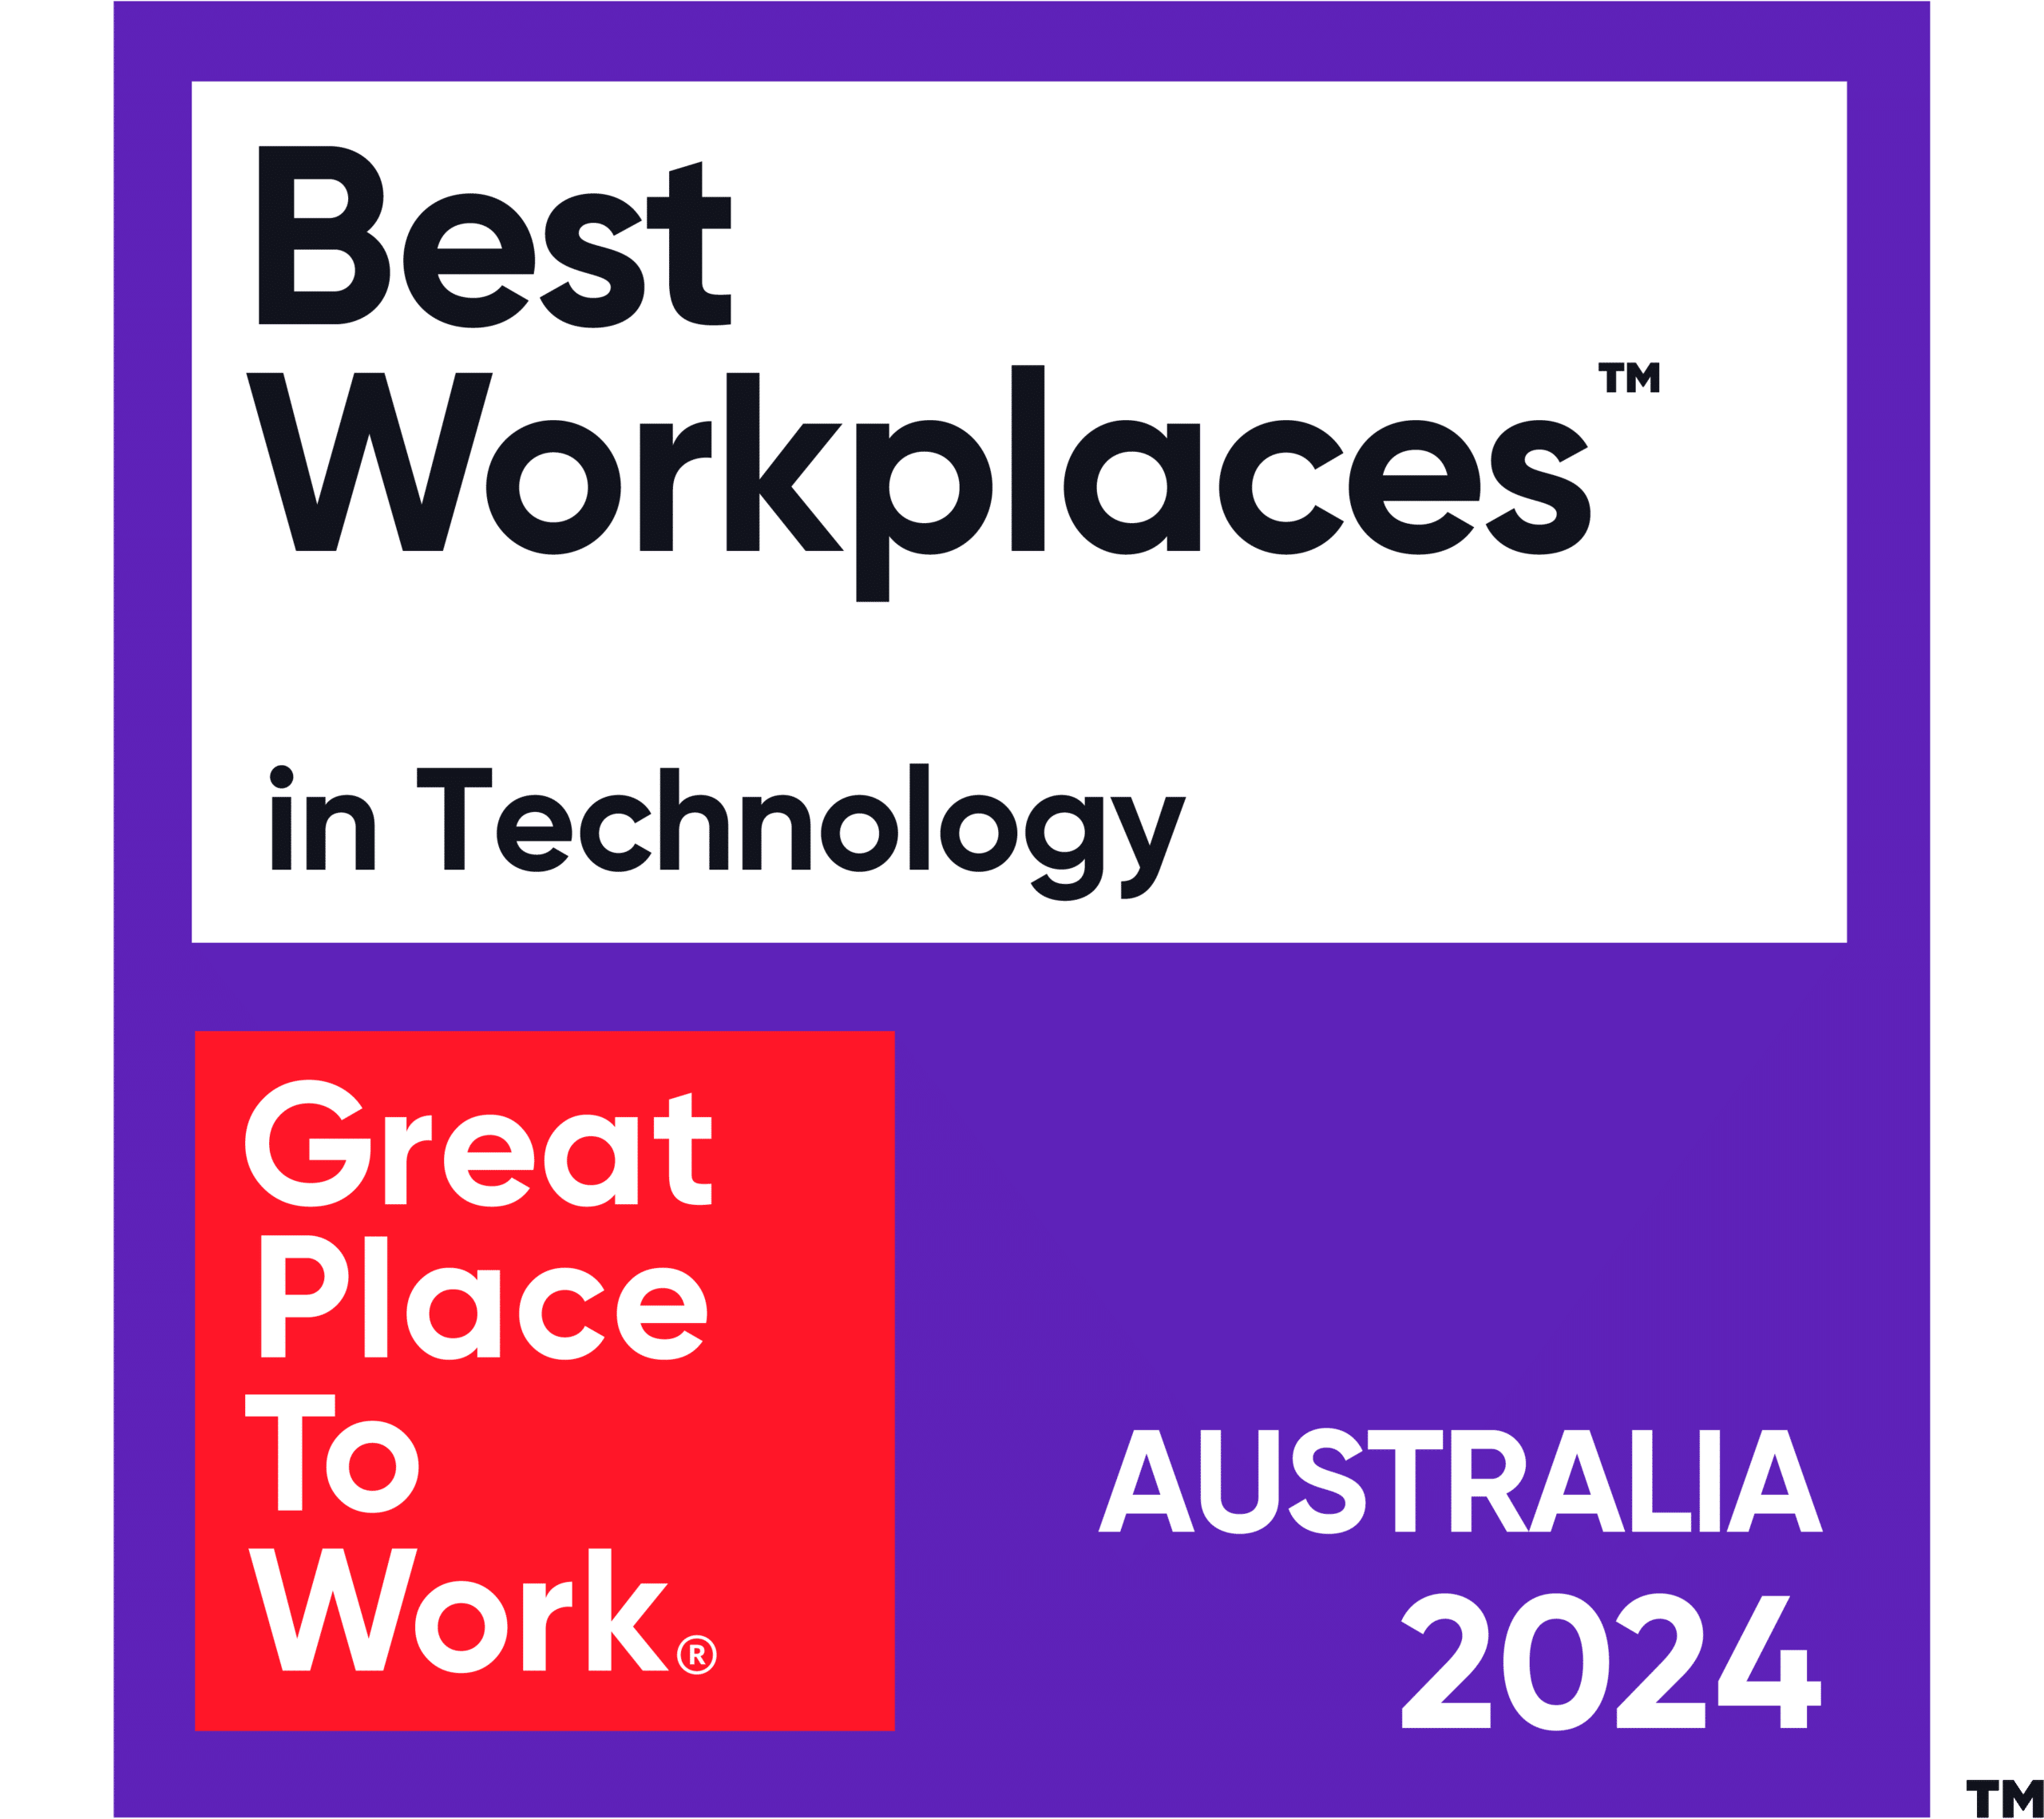 AUS-2024-Best-Workplaces-in-Technology-Cropped